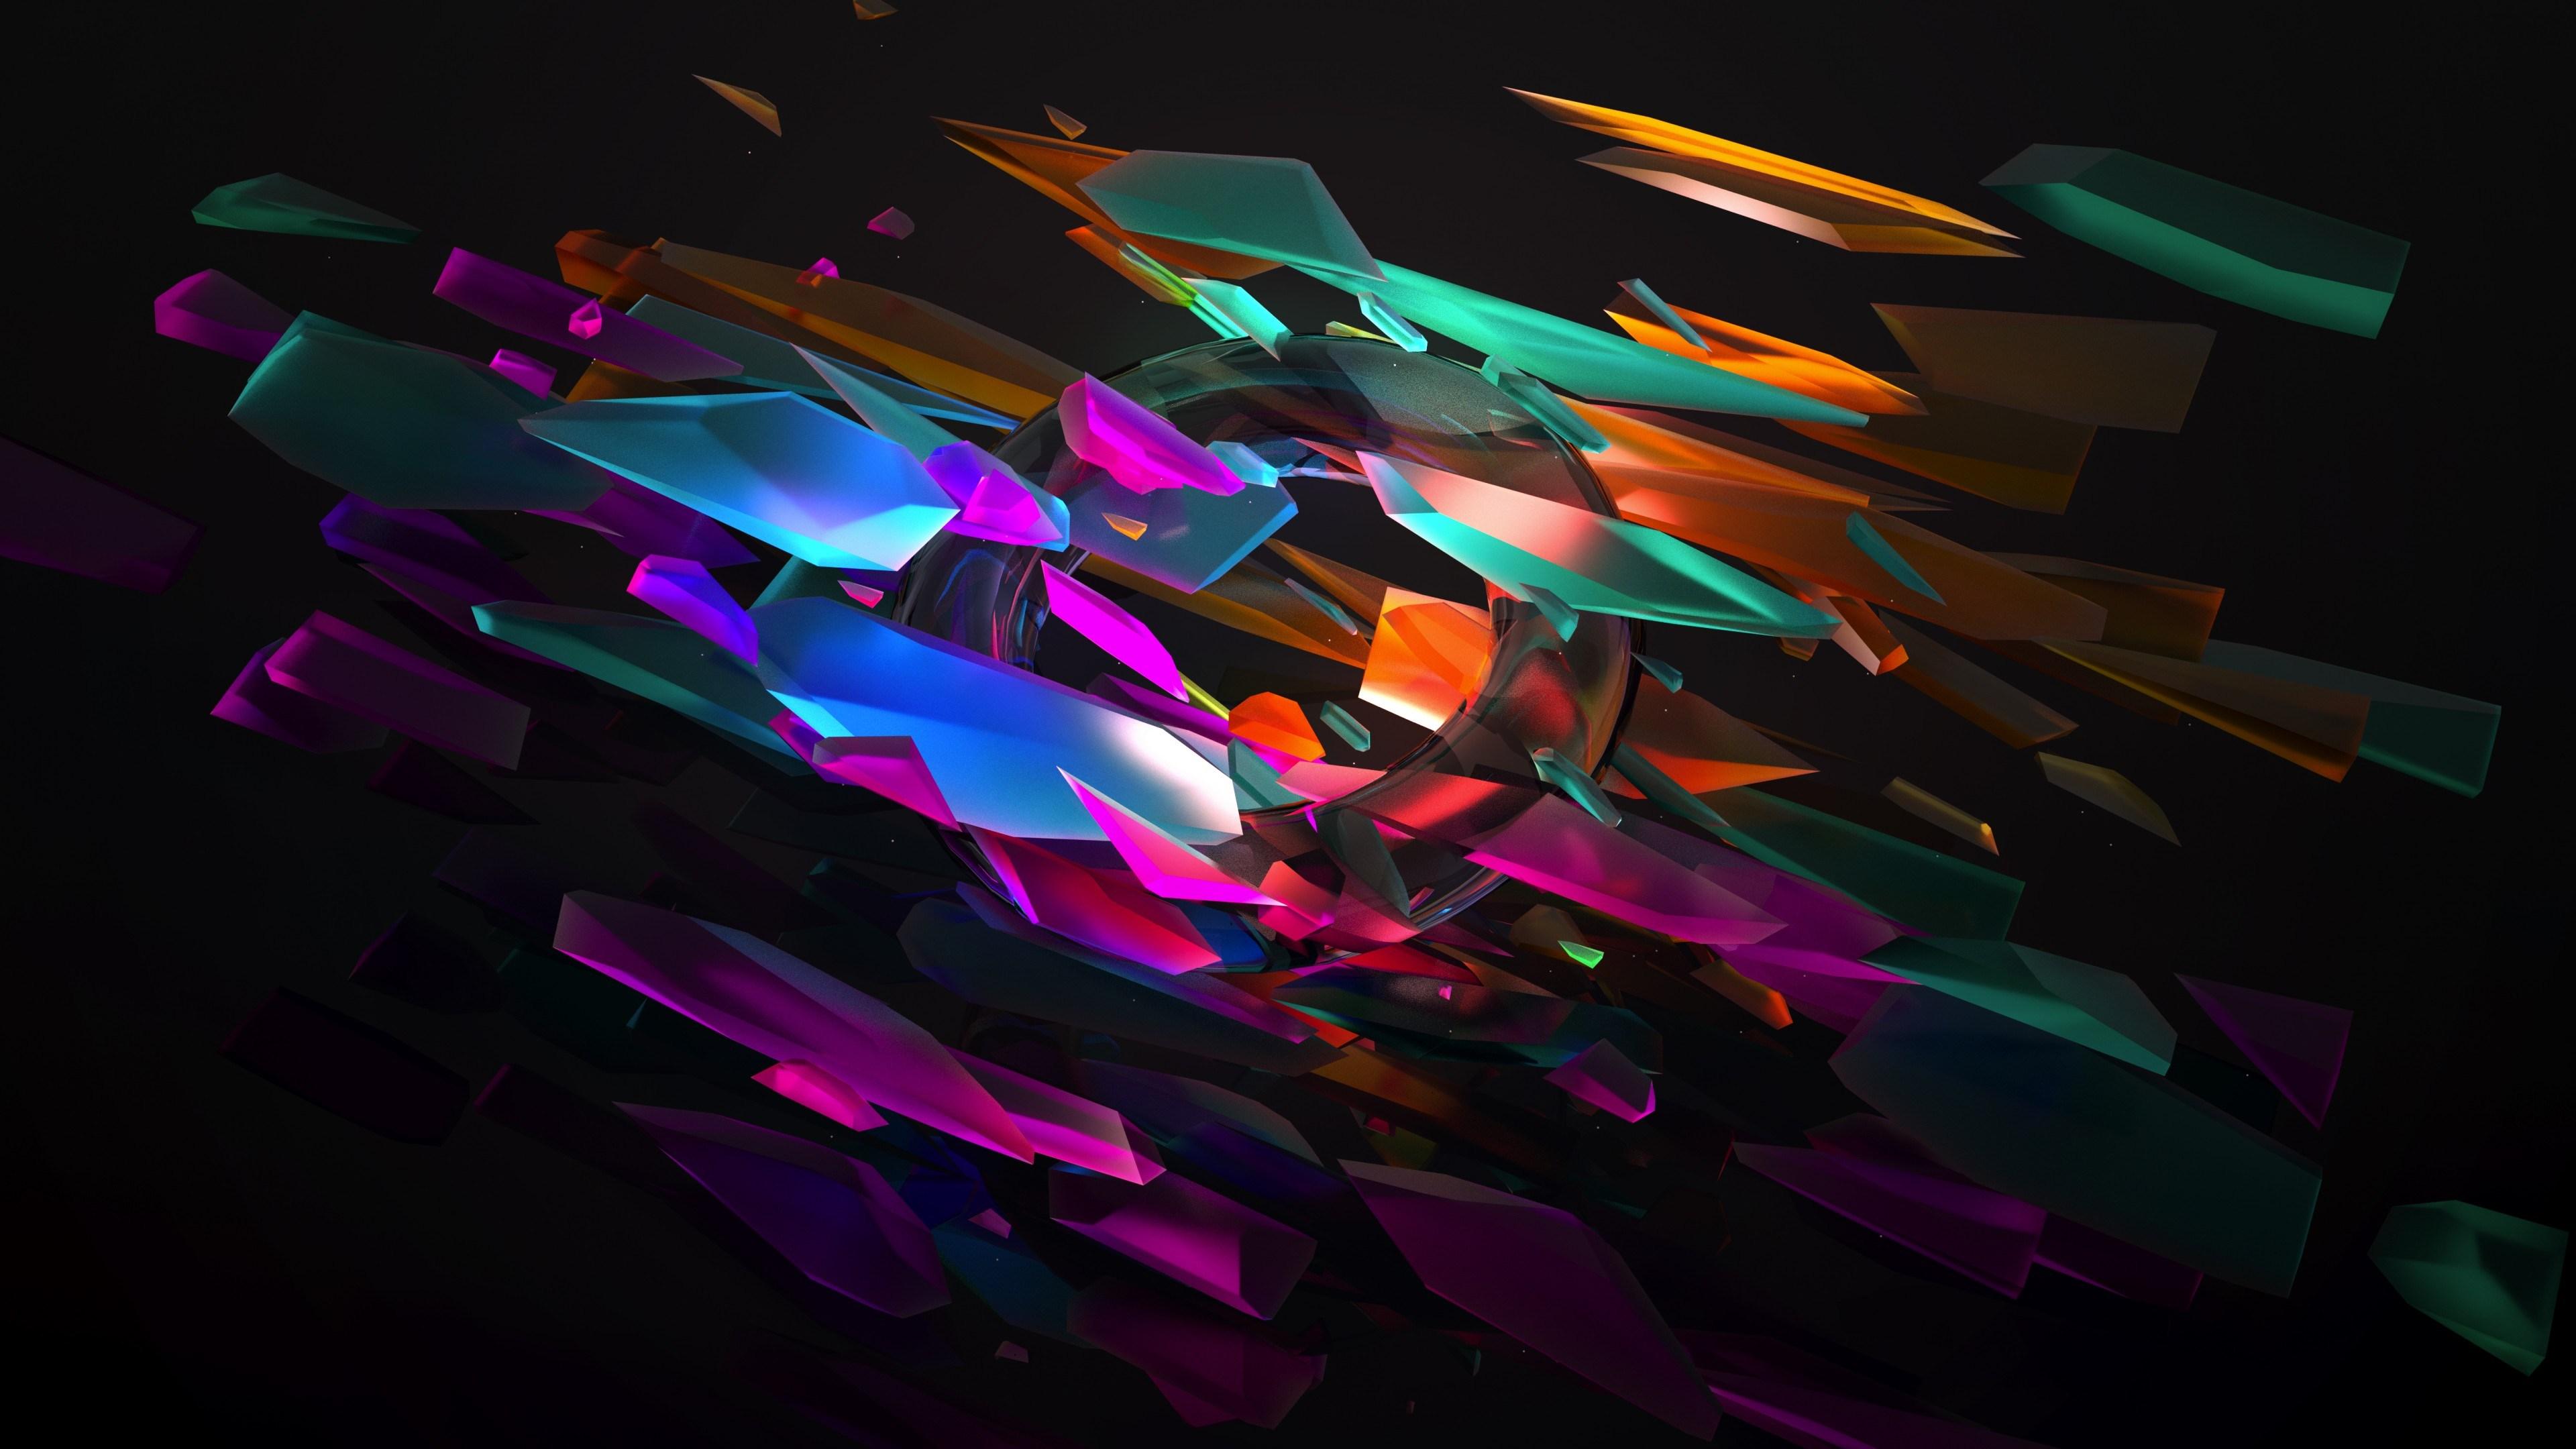 Abstract Colorful Shape 4k Wallpaper and Free Stock